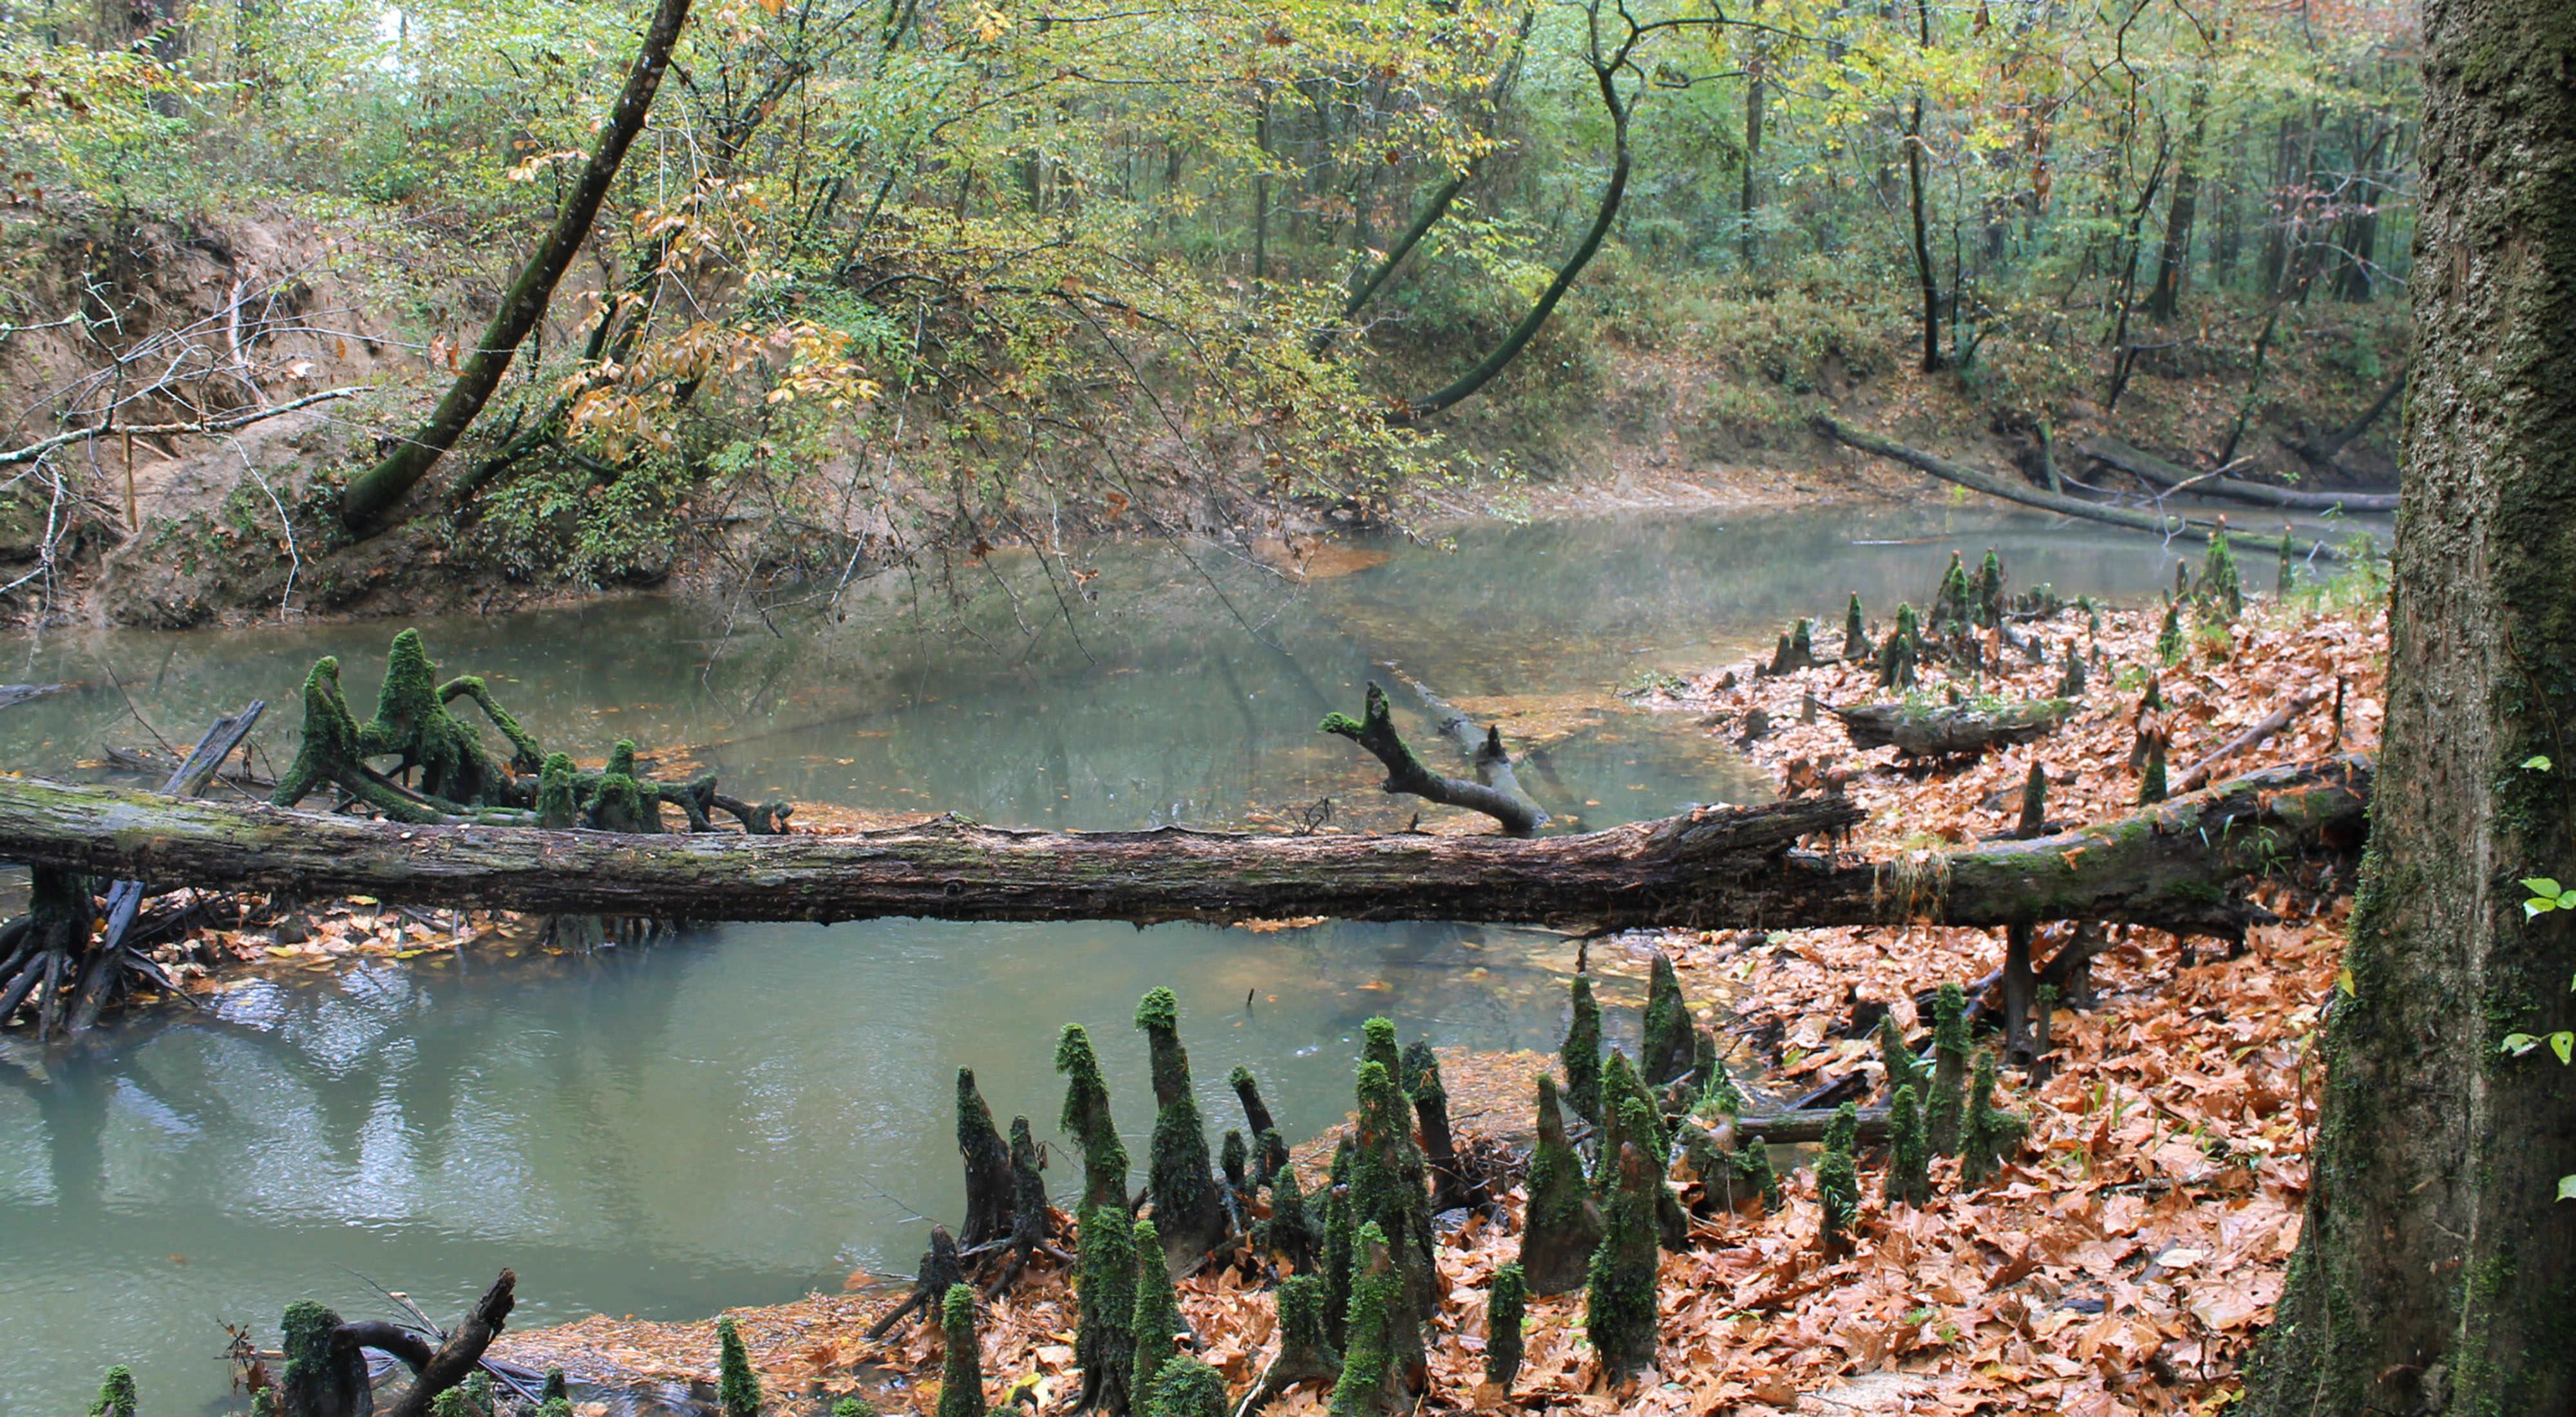 A forested stream flows through the Cat's Den Cave Preserve